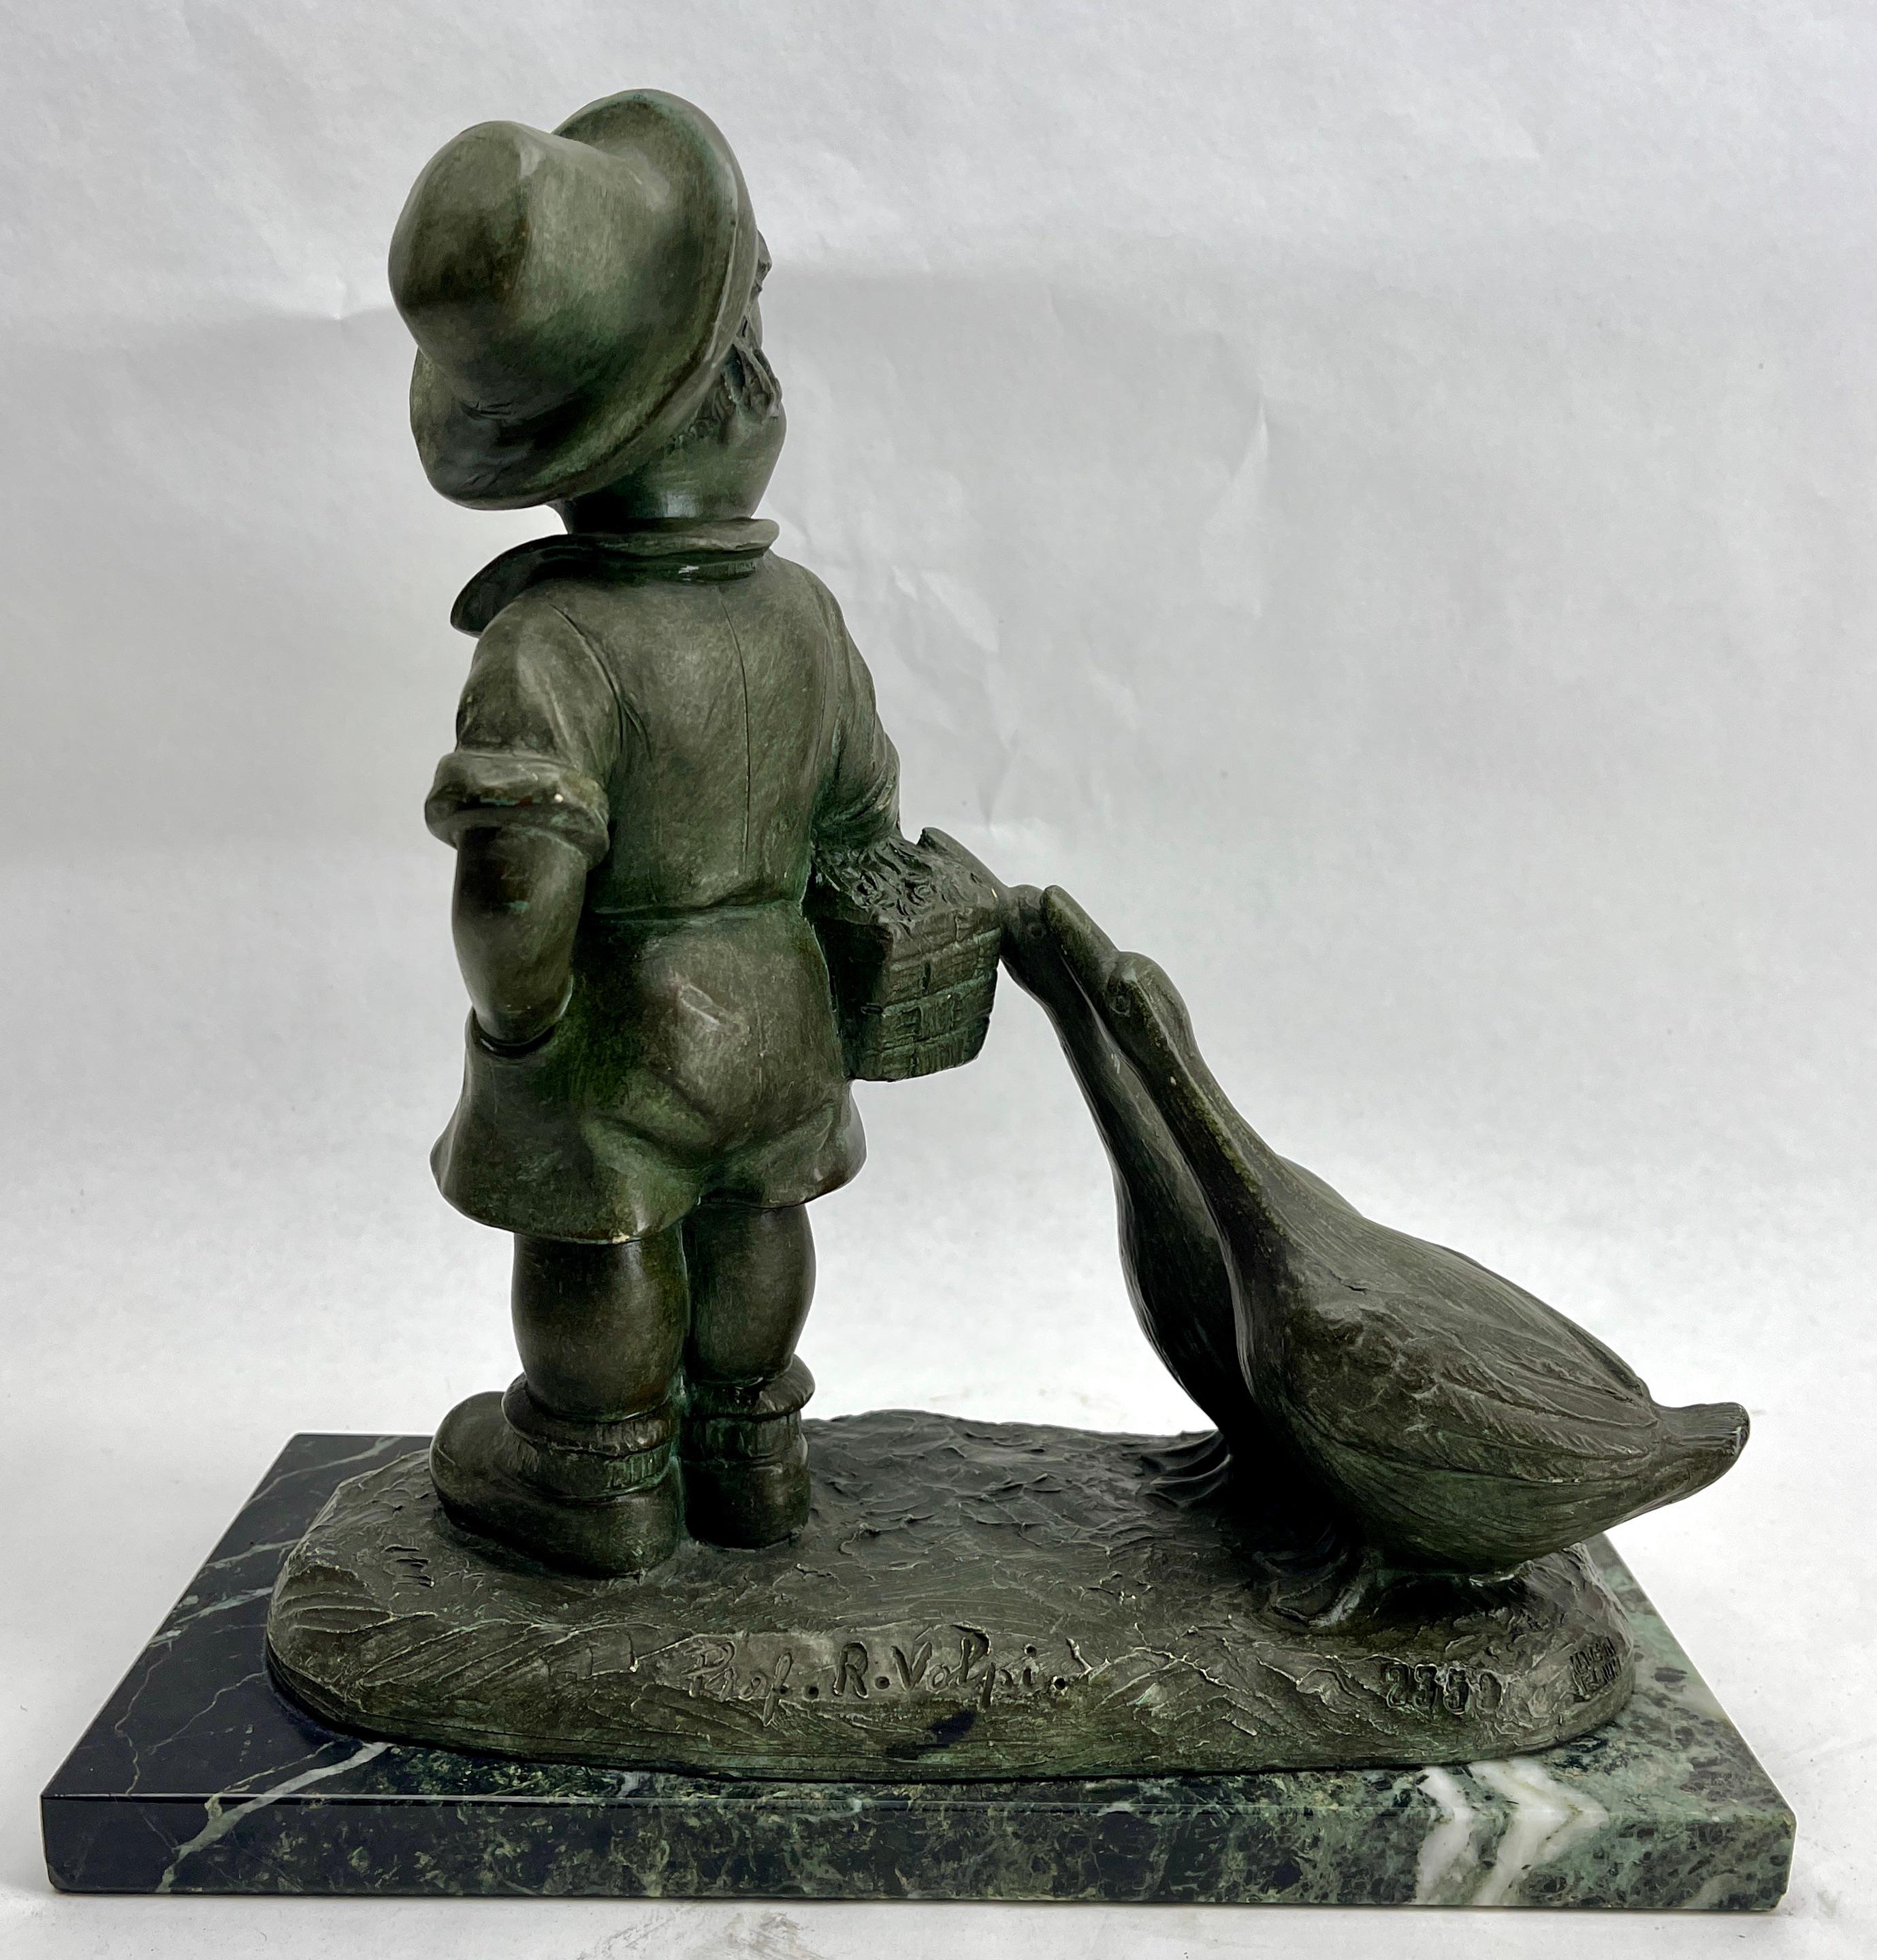 Early 20th Century Art Deco Spelter Sculpture, Signed: Prof. R. Volpi 2359 Made in Belgium For Sale